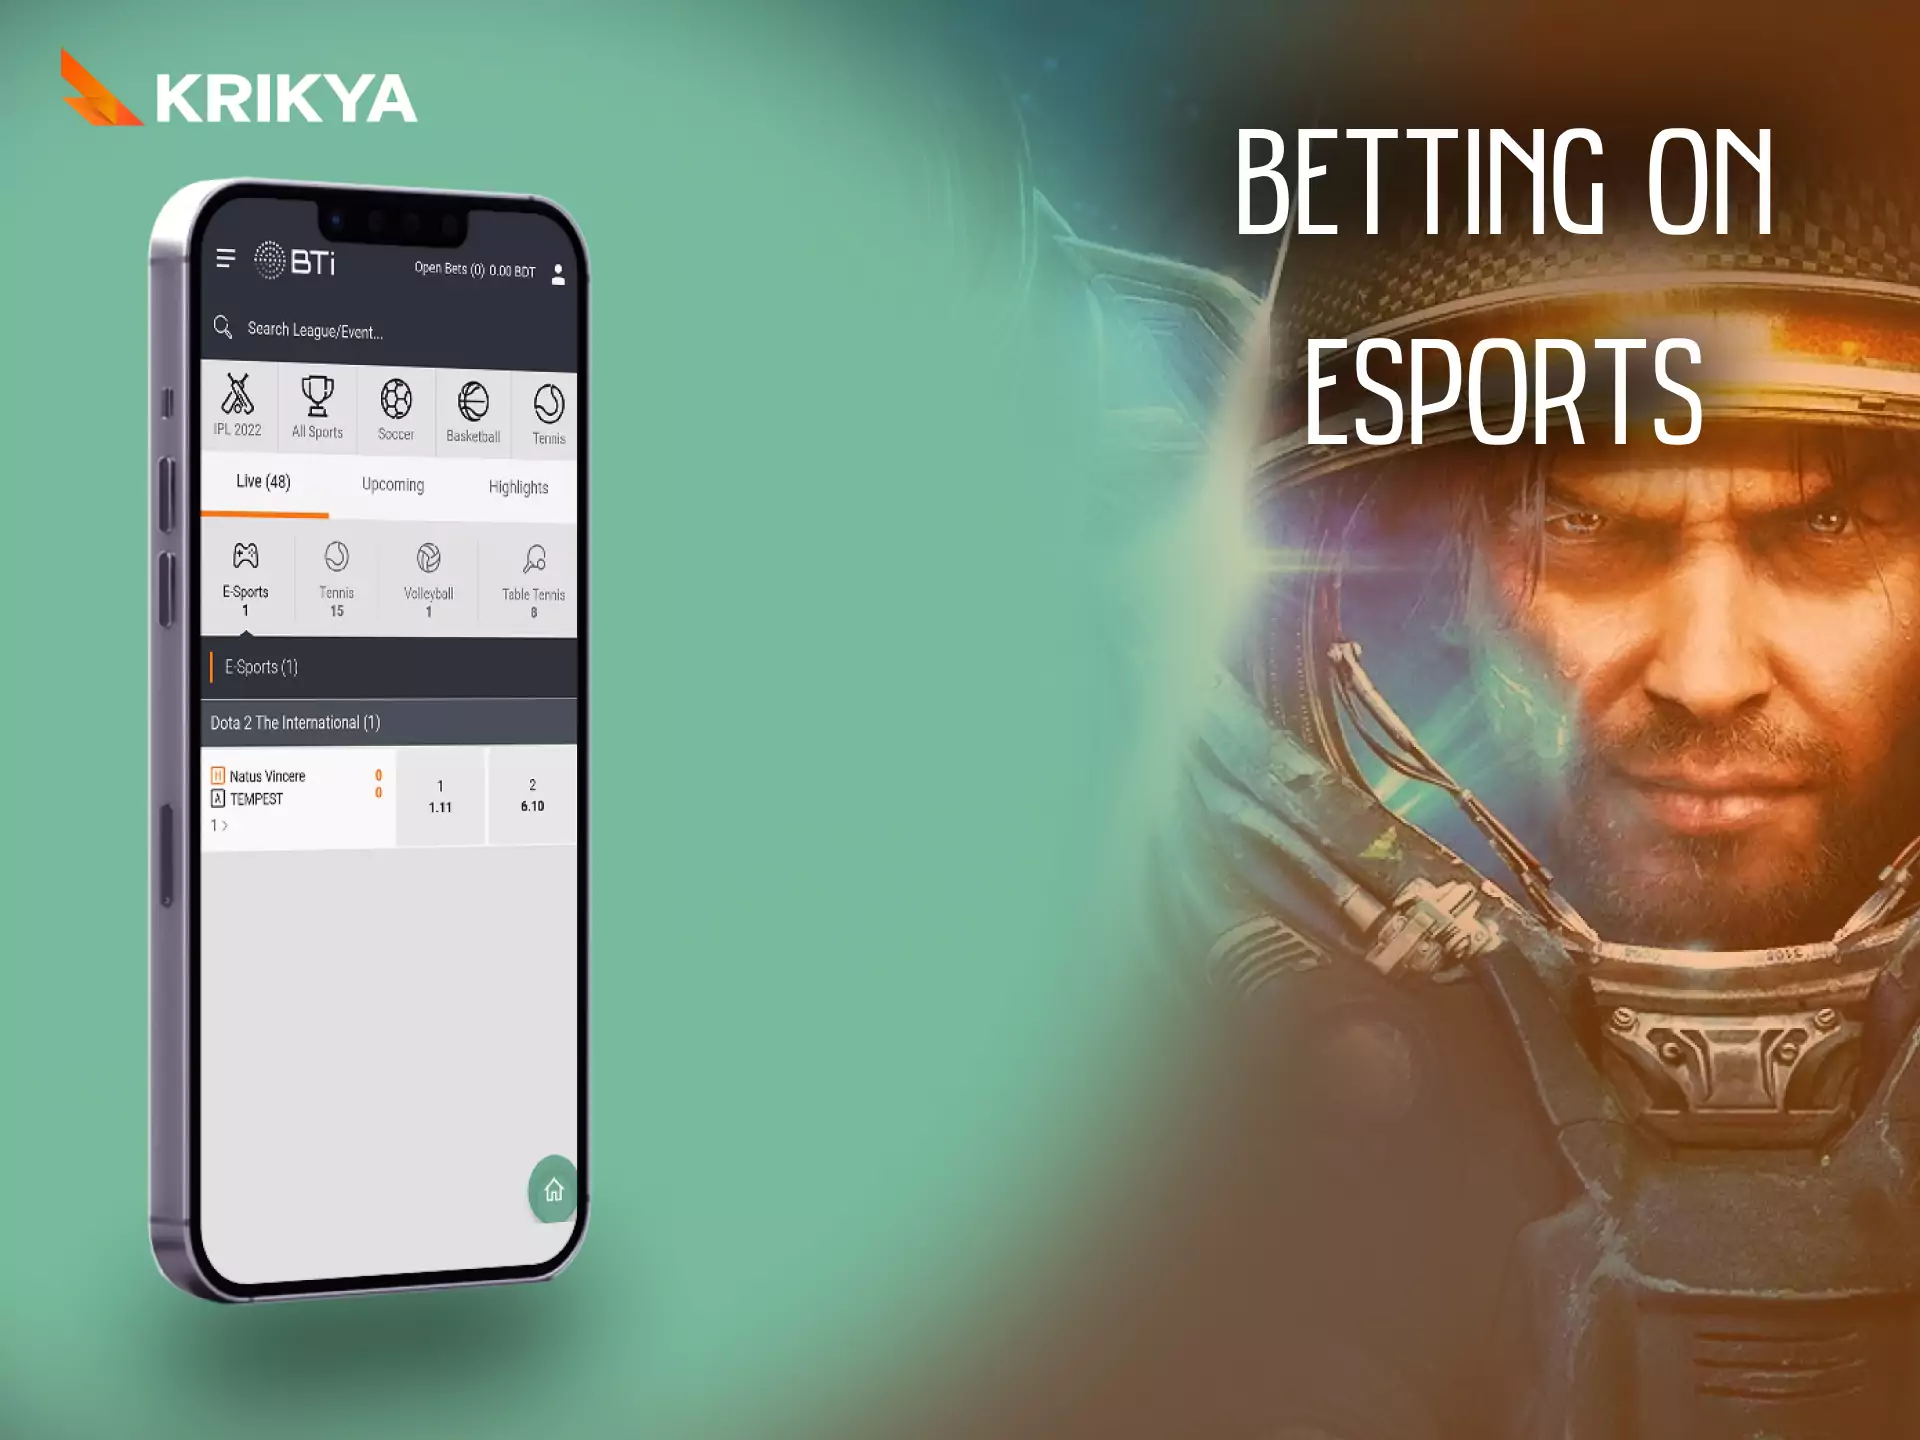 In the Krikya app, if you are an esports fan, place bets on your favorite teams.